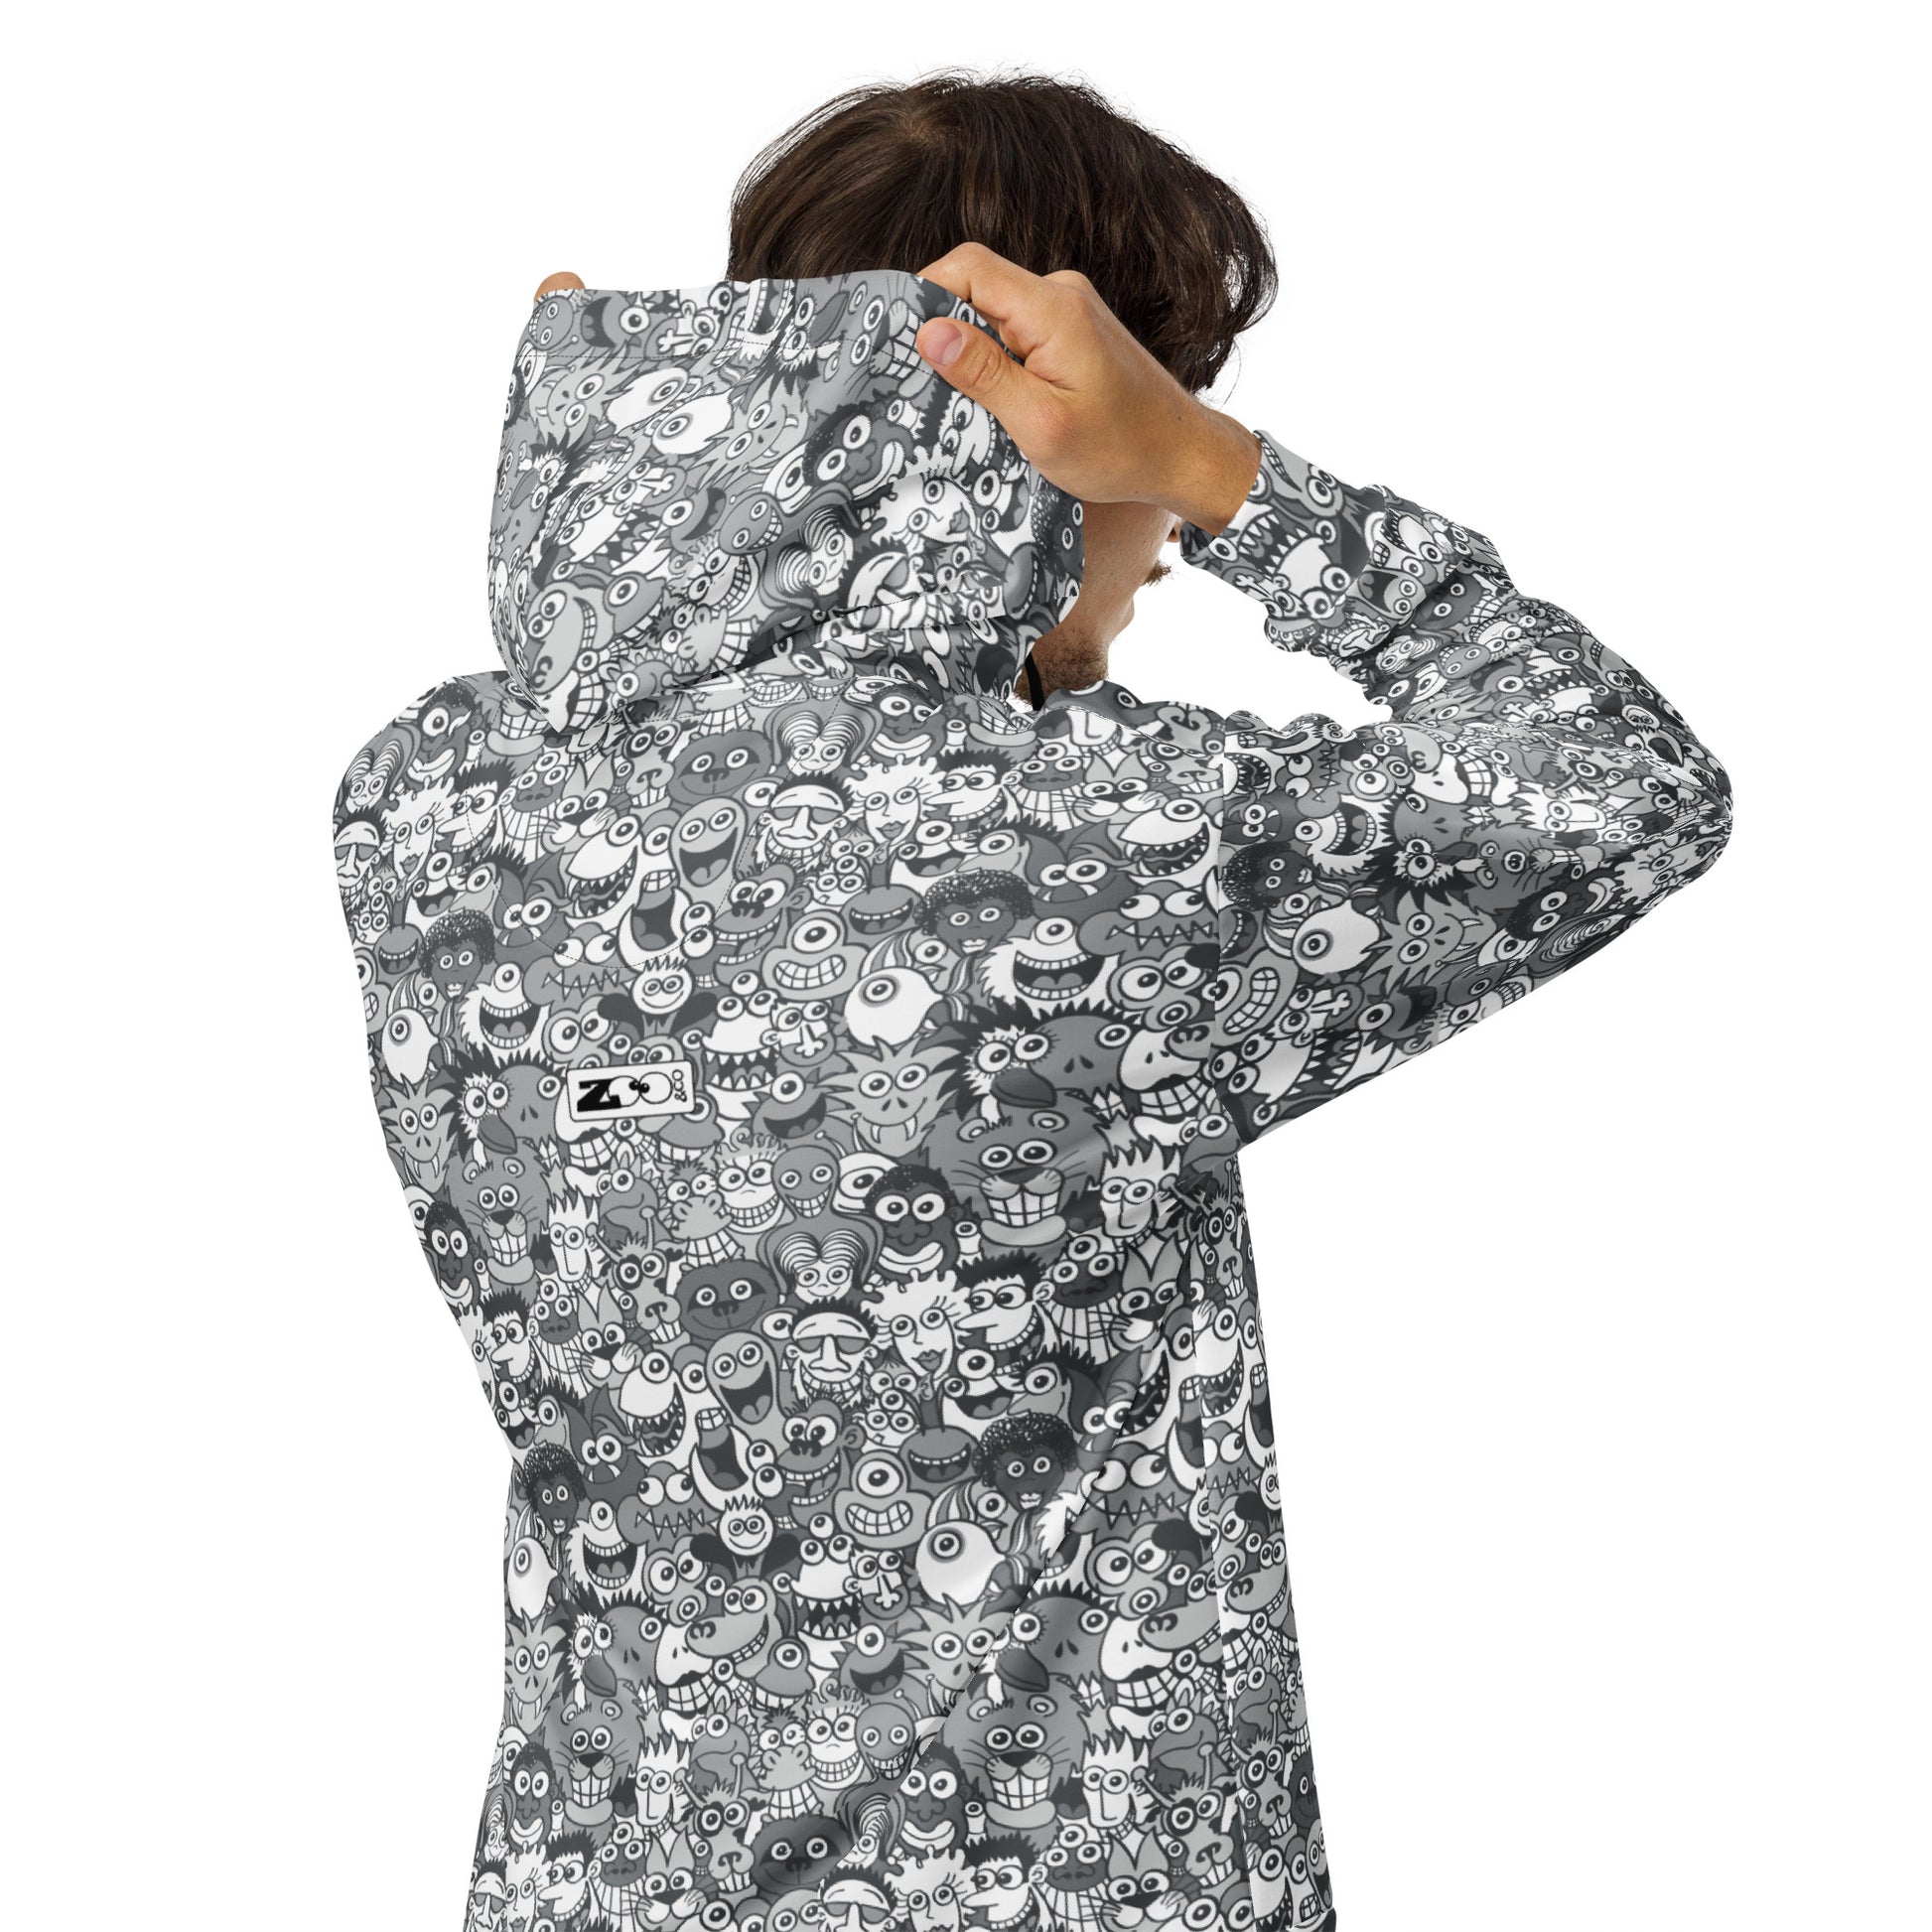 Find the gray man in the gray crowd of this gray world - Unisex zip hoodie. Back view